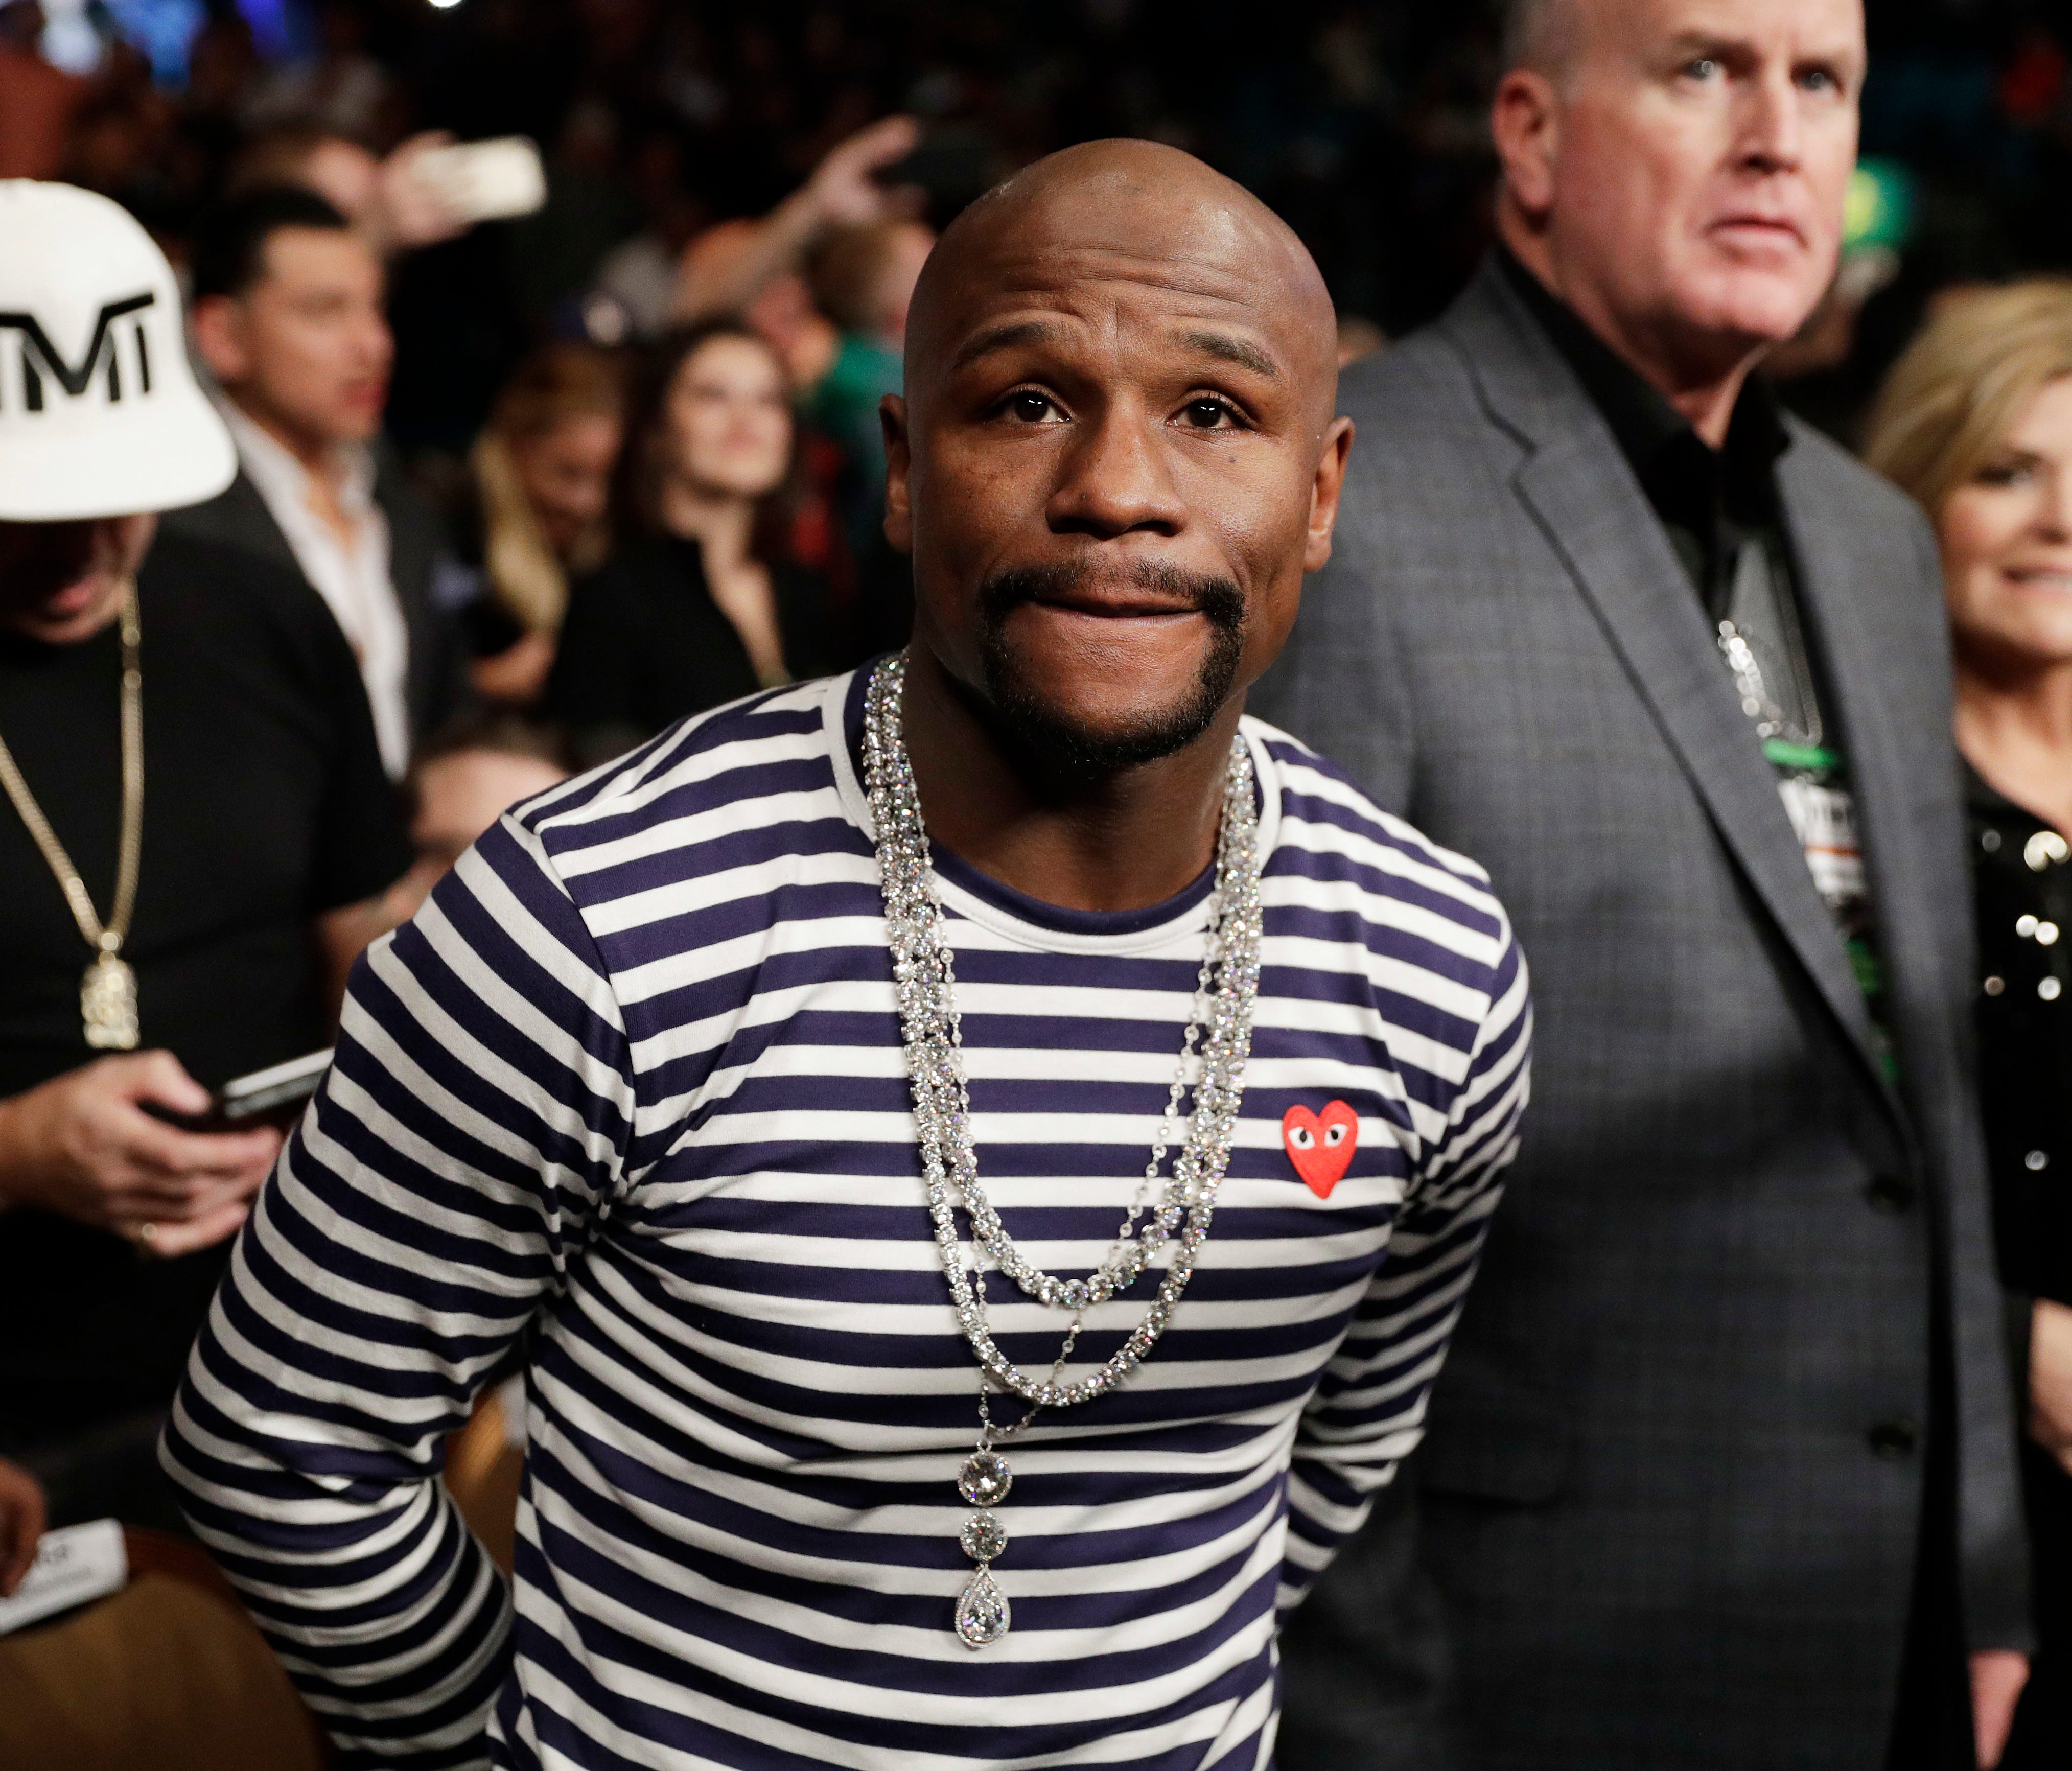 Retired boxer and boxing promoter Floyd Mayweather Jr. attends a fight between Carl Frampton, of Northern Ireland, and Leo Santa Cruz, Saturday, Jan. 28, 2017.